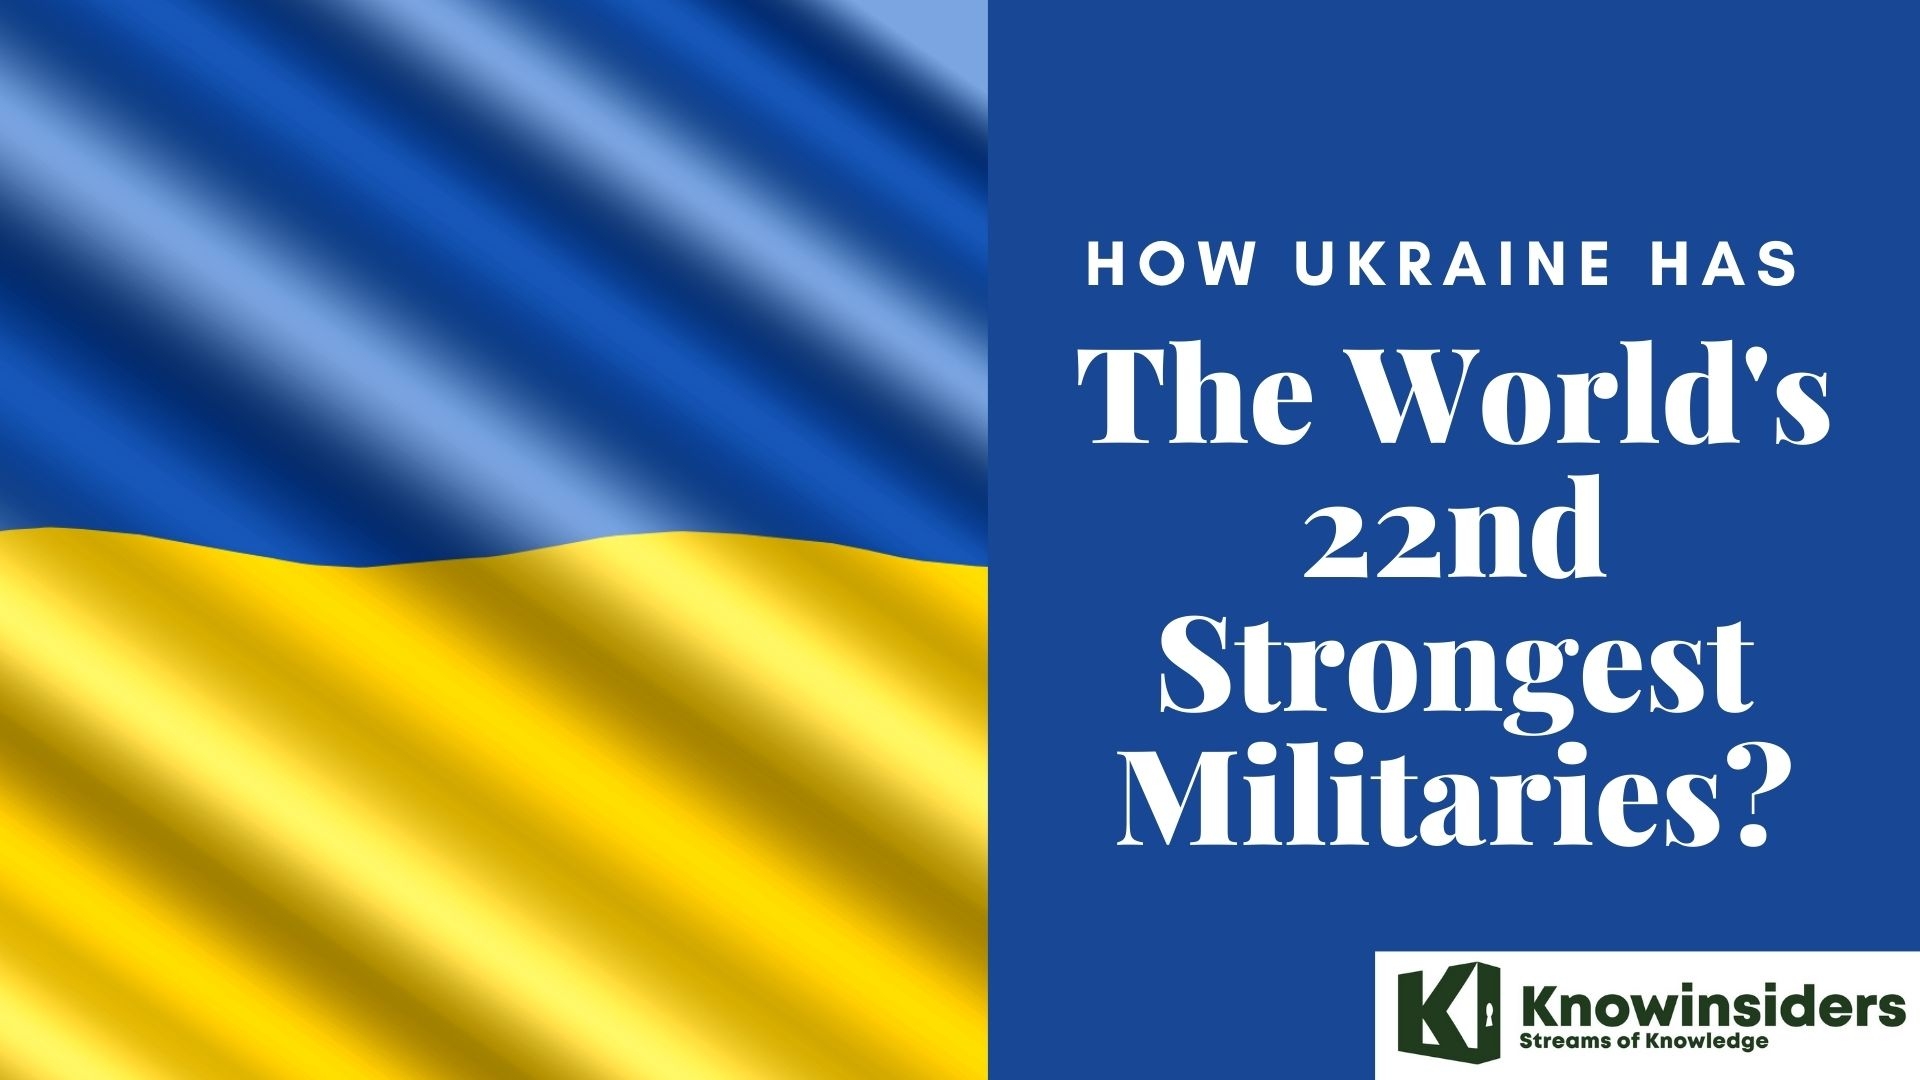 How Strong Is The Ukrainian Army - 22nd Strongest Militaries in The World